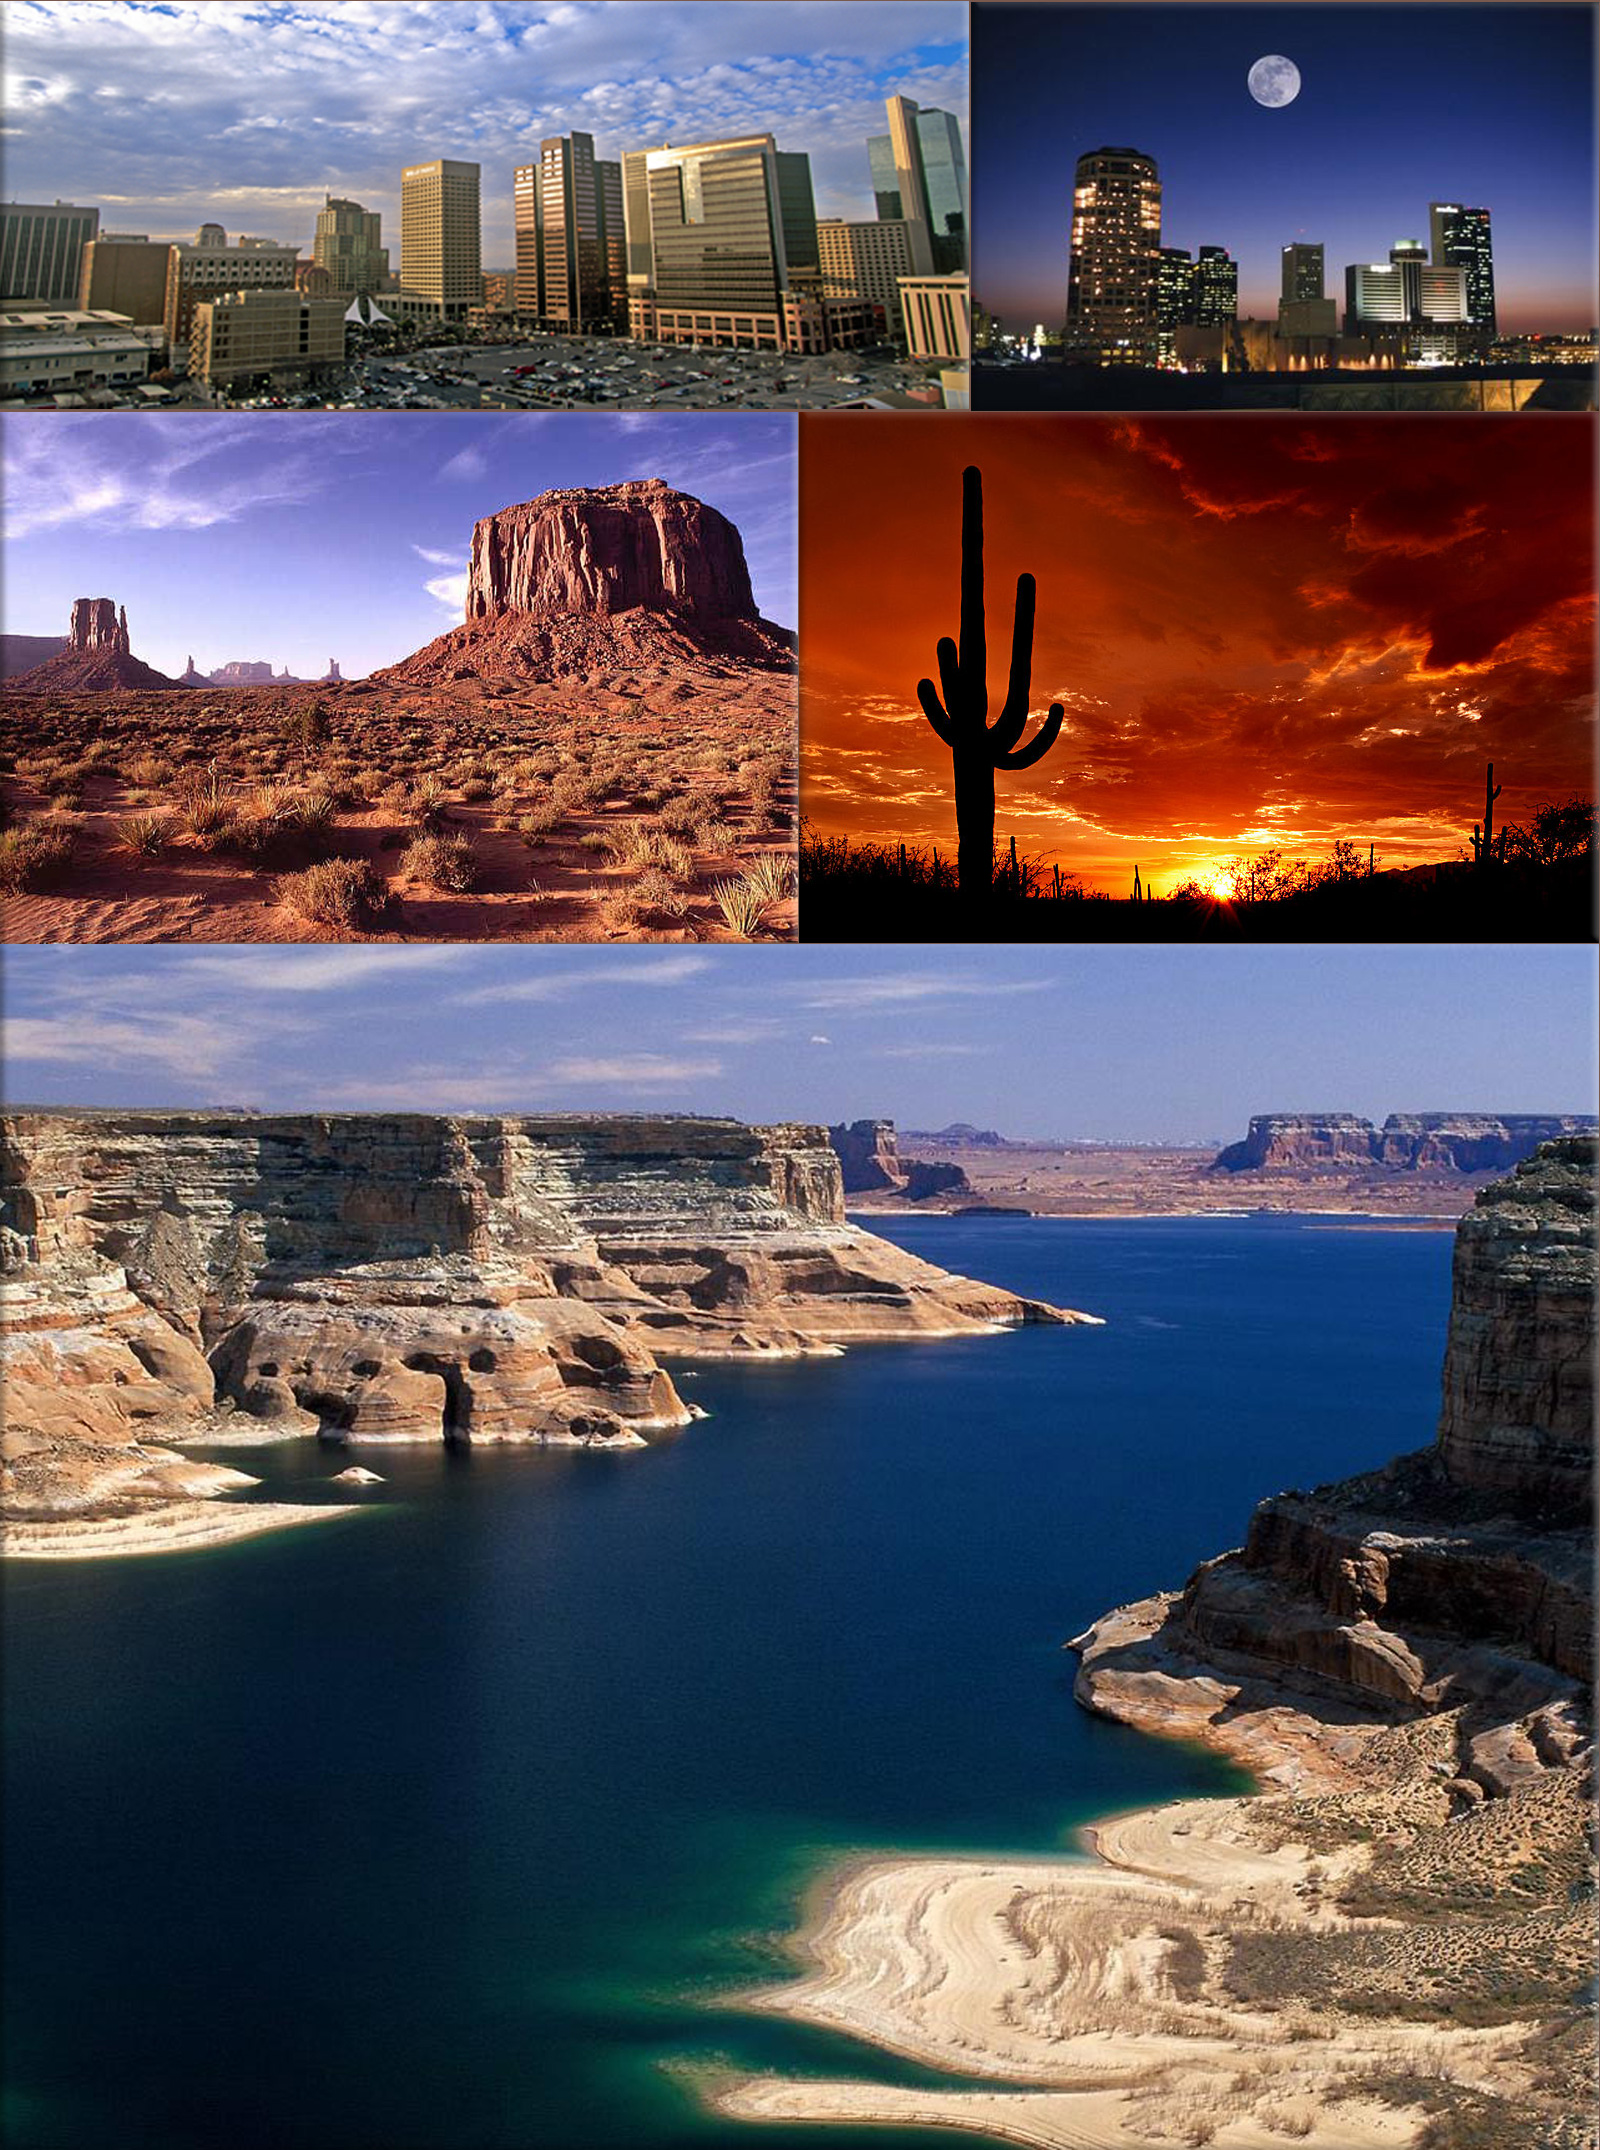 Arizona: a U.S. state located in the southwestern region of the United States (Arizona is noted for its desert climate in its southern half, where there are very hot summers and quite mild winters. The northern half of Arizona also features forests of pine, Douglas fir, and spruce trees, a very large, high plateau (the Colorado Plateau) and some mountain ranges—such as the San Francisco Mountains—as well as large, deep canyons, where there is much more moderate weather for three seasons of the year, plus significant snowfalls)